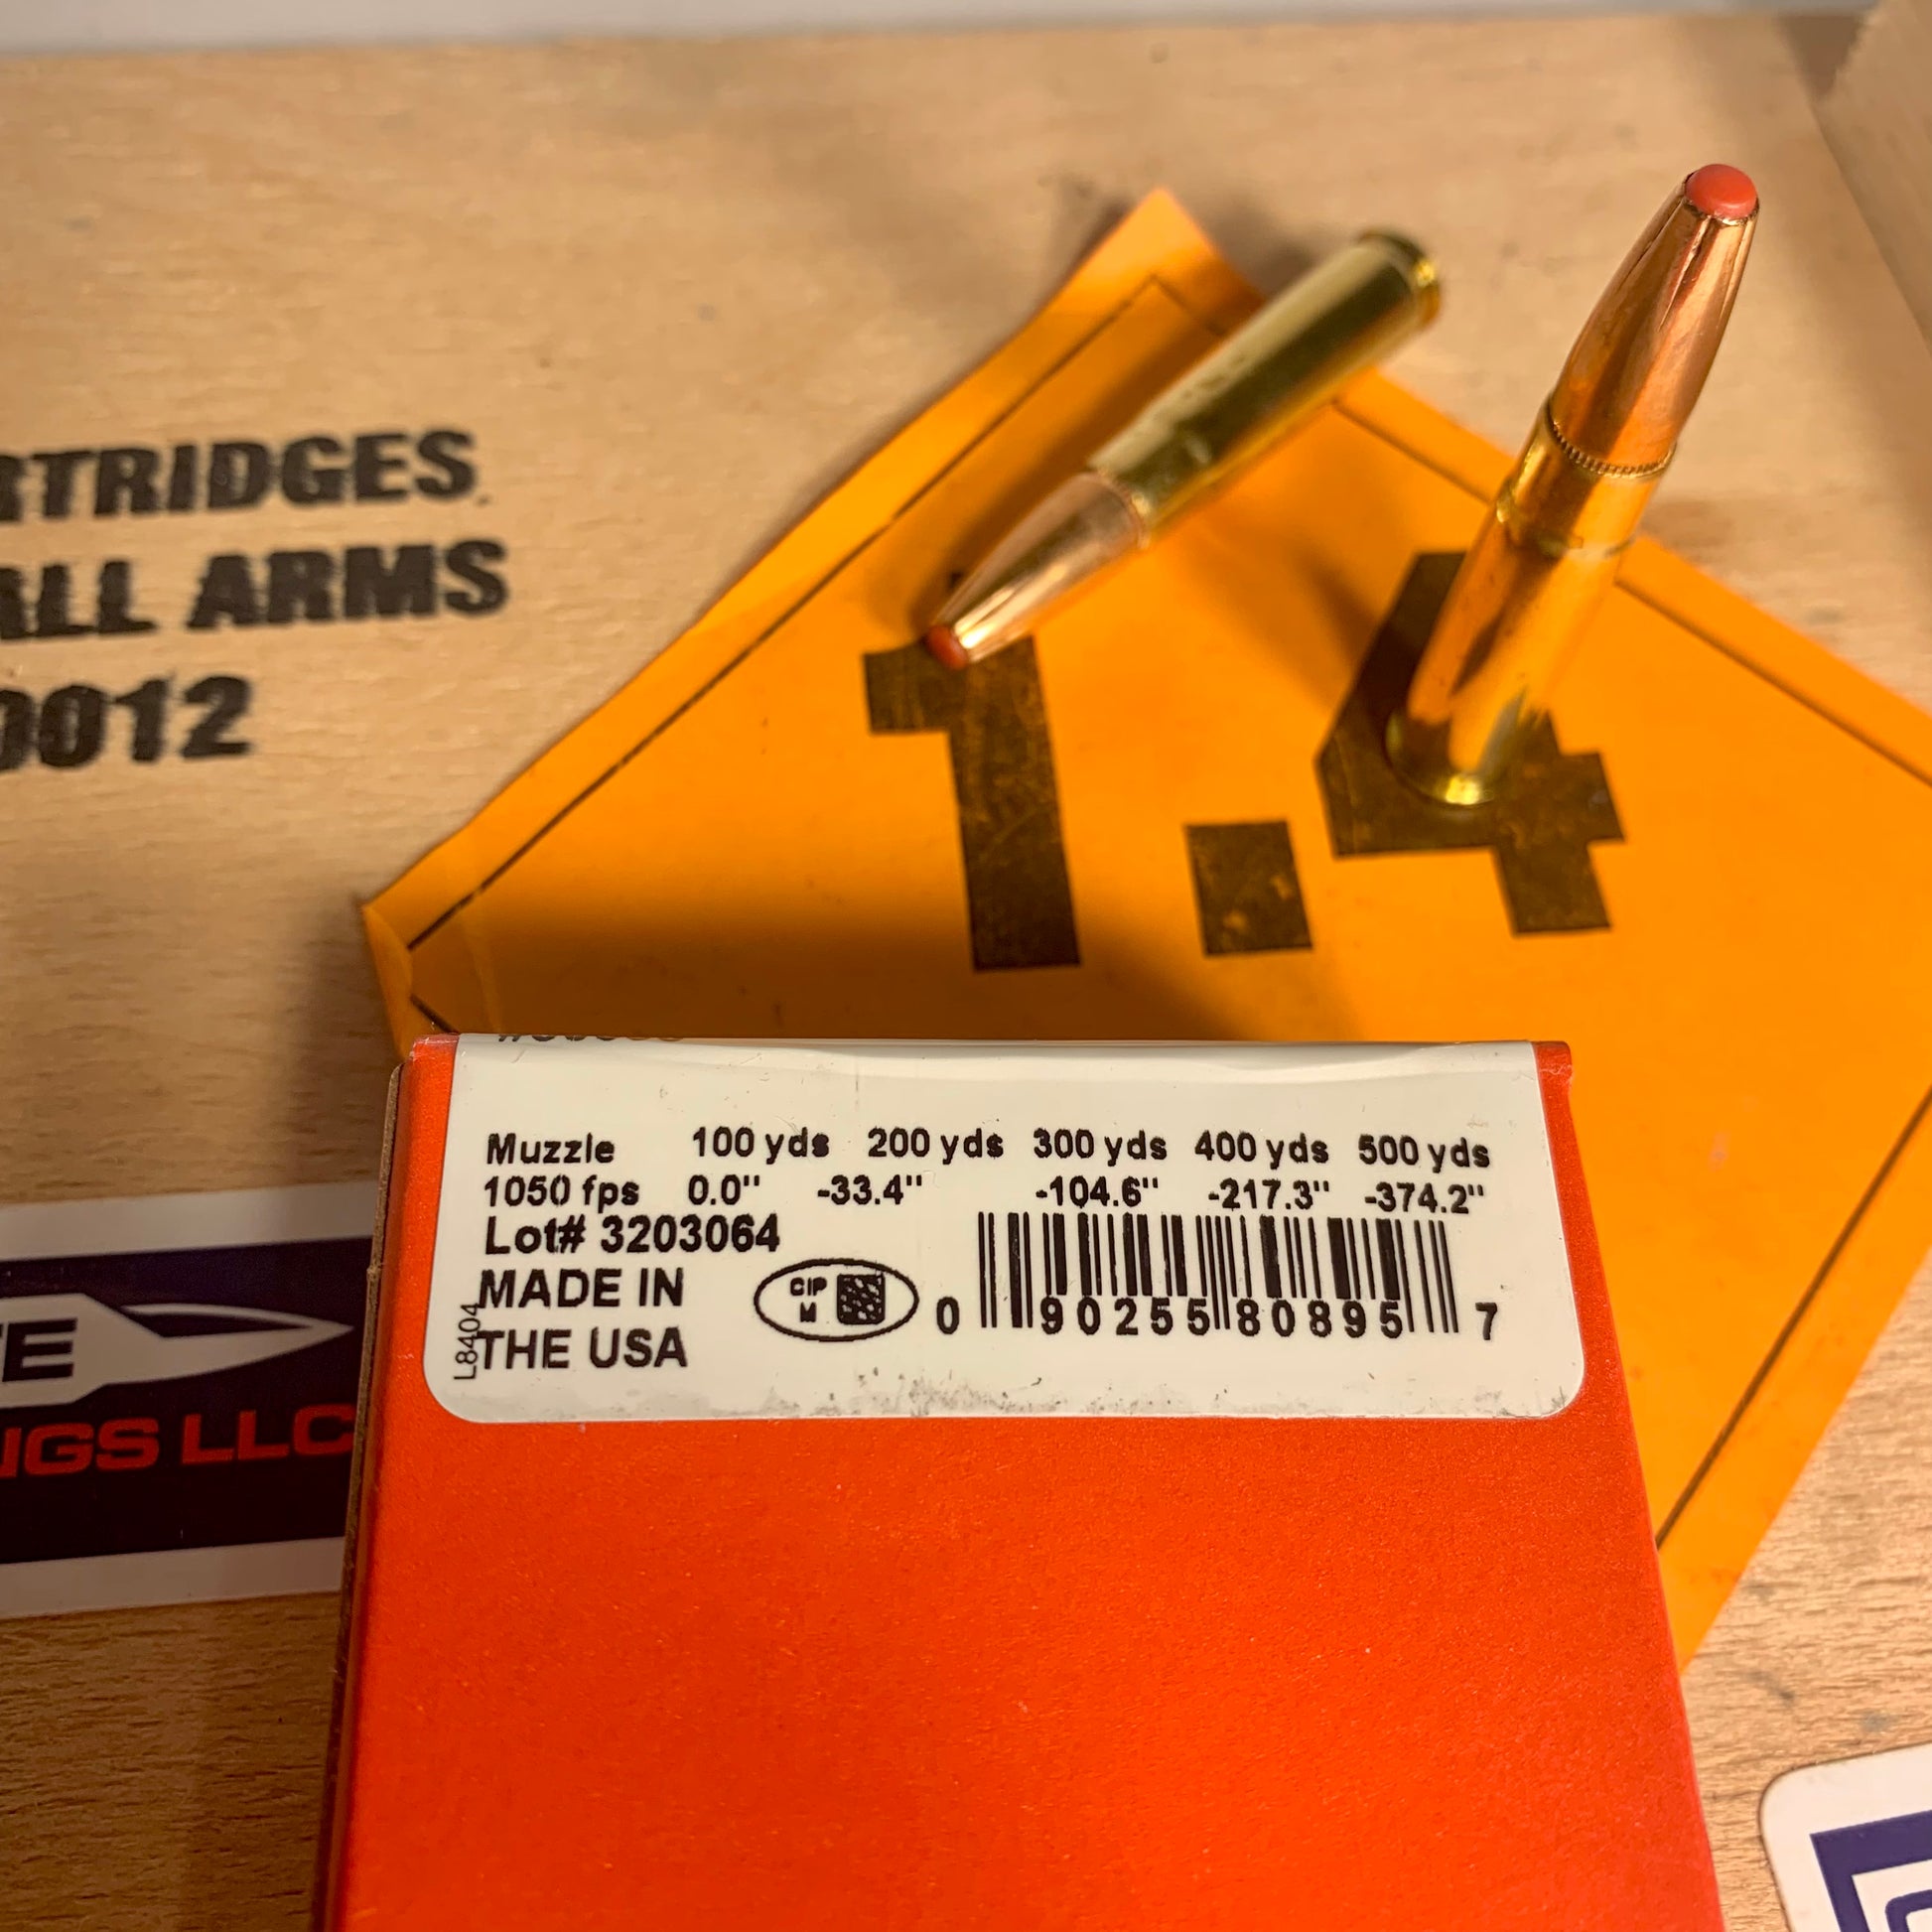 20 Round Box Hornady TAP SUB-X .300 Blackout Ammo 190gr Subsonic - NO LE CREDS REQUIRED - 80895